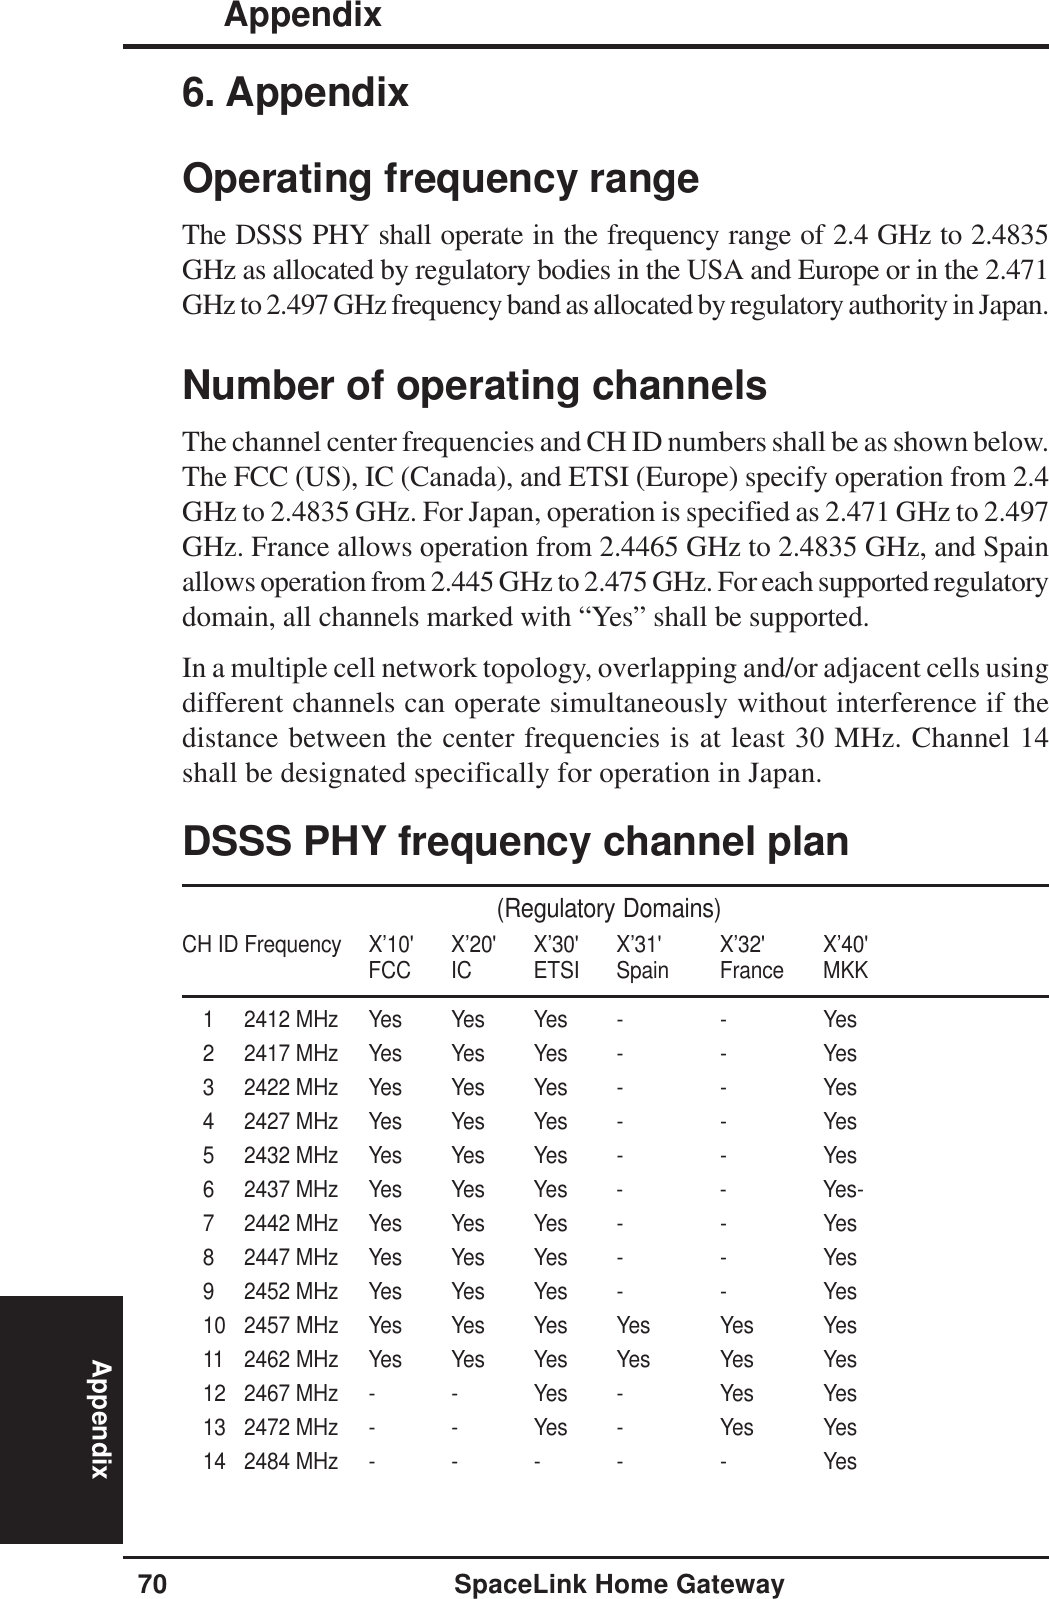 Appendix70 SpaceLink Home GatewayAppendix6. AppendixOperating frequency rangeThe DSSS PHY shall operate in the frequency range of 2.4 GHz to 2.4835GHz as allocated by regulatory bodies in the USA and Europe or in the 2.471GHz to 2.497 GHz frequency band as allocated by regulatory authority in Japan.Number of operating channelsThe channel center frequencies and CH ID numbers shall be as shown below.The FCC (US), IC (Canada), and ETSI (Europe) specify operation from 2.4GHz to 2.4835 GHz. For Japan, operation is specified as 2.471 GHz to 2.497GHz. France allows operation from 2.4465 GHz to 2.4835 GHz, and Spainallows operation from 2.445 GHz to 2.475 GHz. For each supported regulatorydomain, all channels marked with “Yes” shall be supported.In a multiple cell network topology, overlapping and/or adjacent cells usingdifferent channels can operate simultaneously without interference if thedistance between the center frequencies is at least 30 MHz. Channel 14shall be designated specifically for operation in Japan.DSSS PHY frequency channel plan(Regulatory Domains)CH ID Frequency X’10&apos; X’20&apos; X’30&apos; X’31&apos; X’32&apos; X’40&apos;FCC IC ETSI Spain France MKK1 2412 MHz Yes Yes Yes - - Yes2 2417 MHz Yes Yes Yes - - Yes3 2422 MHz Yes Yes Yes - - Yes4 2427 MHz Yes Yes Yes - - Yes5 2432 MHz Yes Yes Yes - - Yes6 2437 MHz Yes Yes Yes - - Yes-7 2442 MHz Yes Yes Yes - - Yes8 2447 MHz Yes Yes Yes - - Yes9 2452 MHz Yes Yes Yes - - Yes10 2457 MHz Yes Yes Yes Yes Yes Yes11 2462 MHz Yes Yes Yes Yes Yes Yes12 2467 MHz - - Yes - Yes Yes13 2472 MHz - - Yes - Yes Yes14 2484 MHz - - - - - Yes